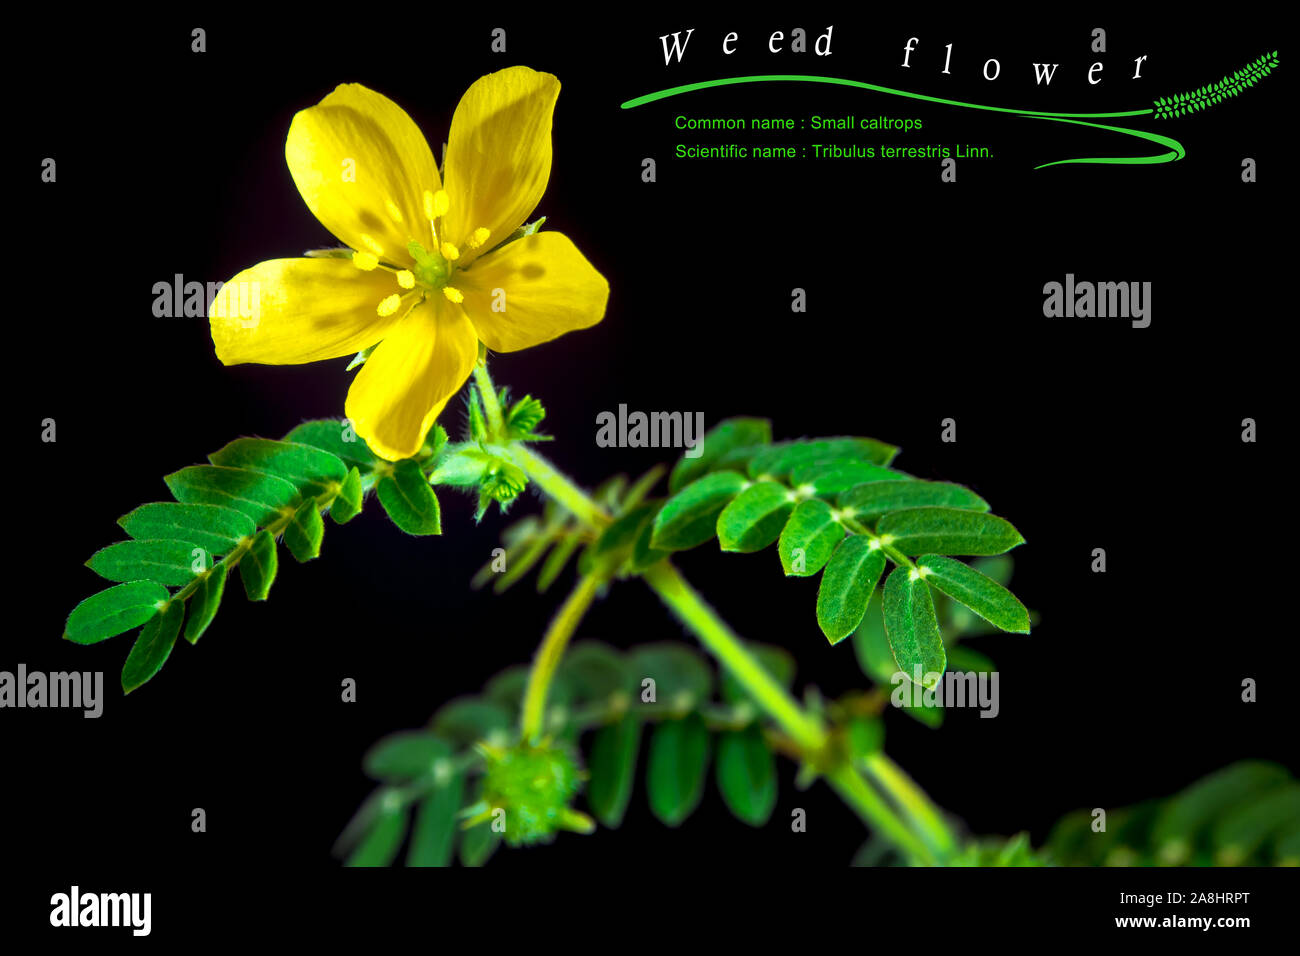 Yellow flower of small caltrops weed, isolated flower on black background with common and scientific name Stock Photo